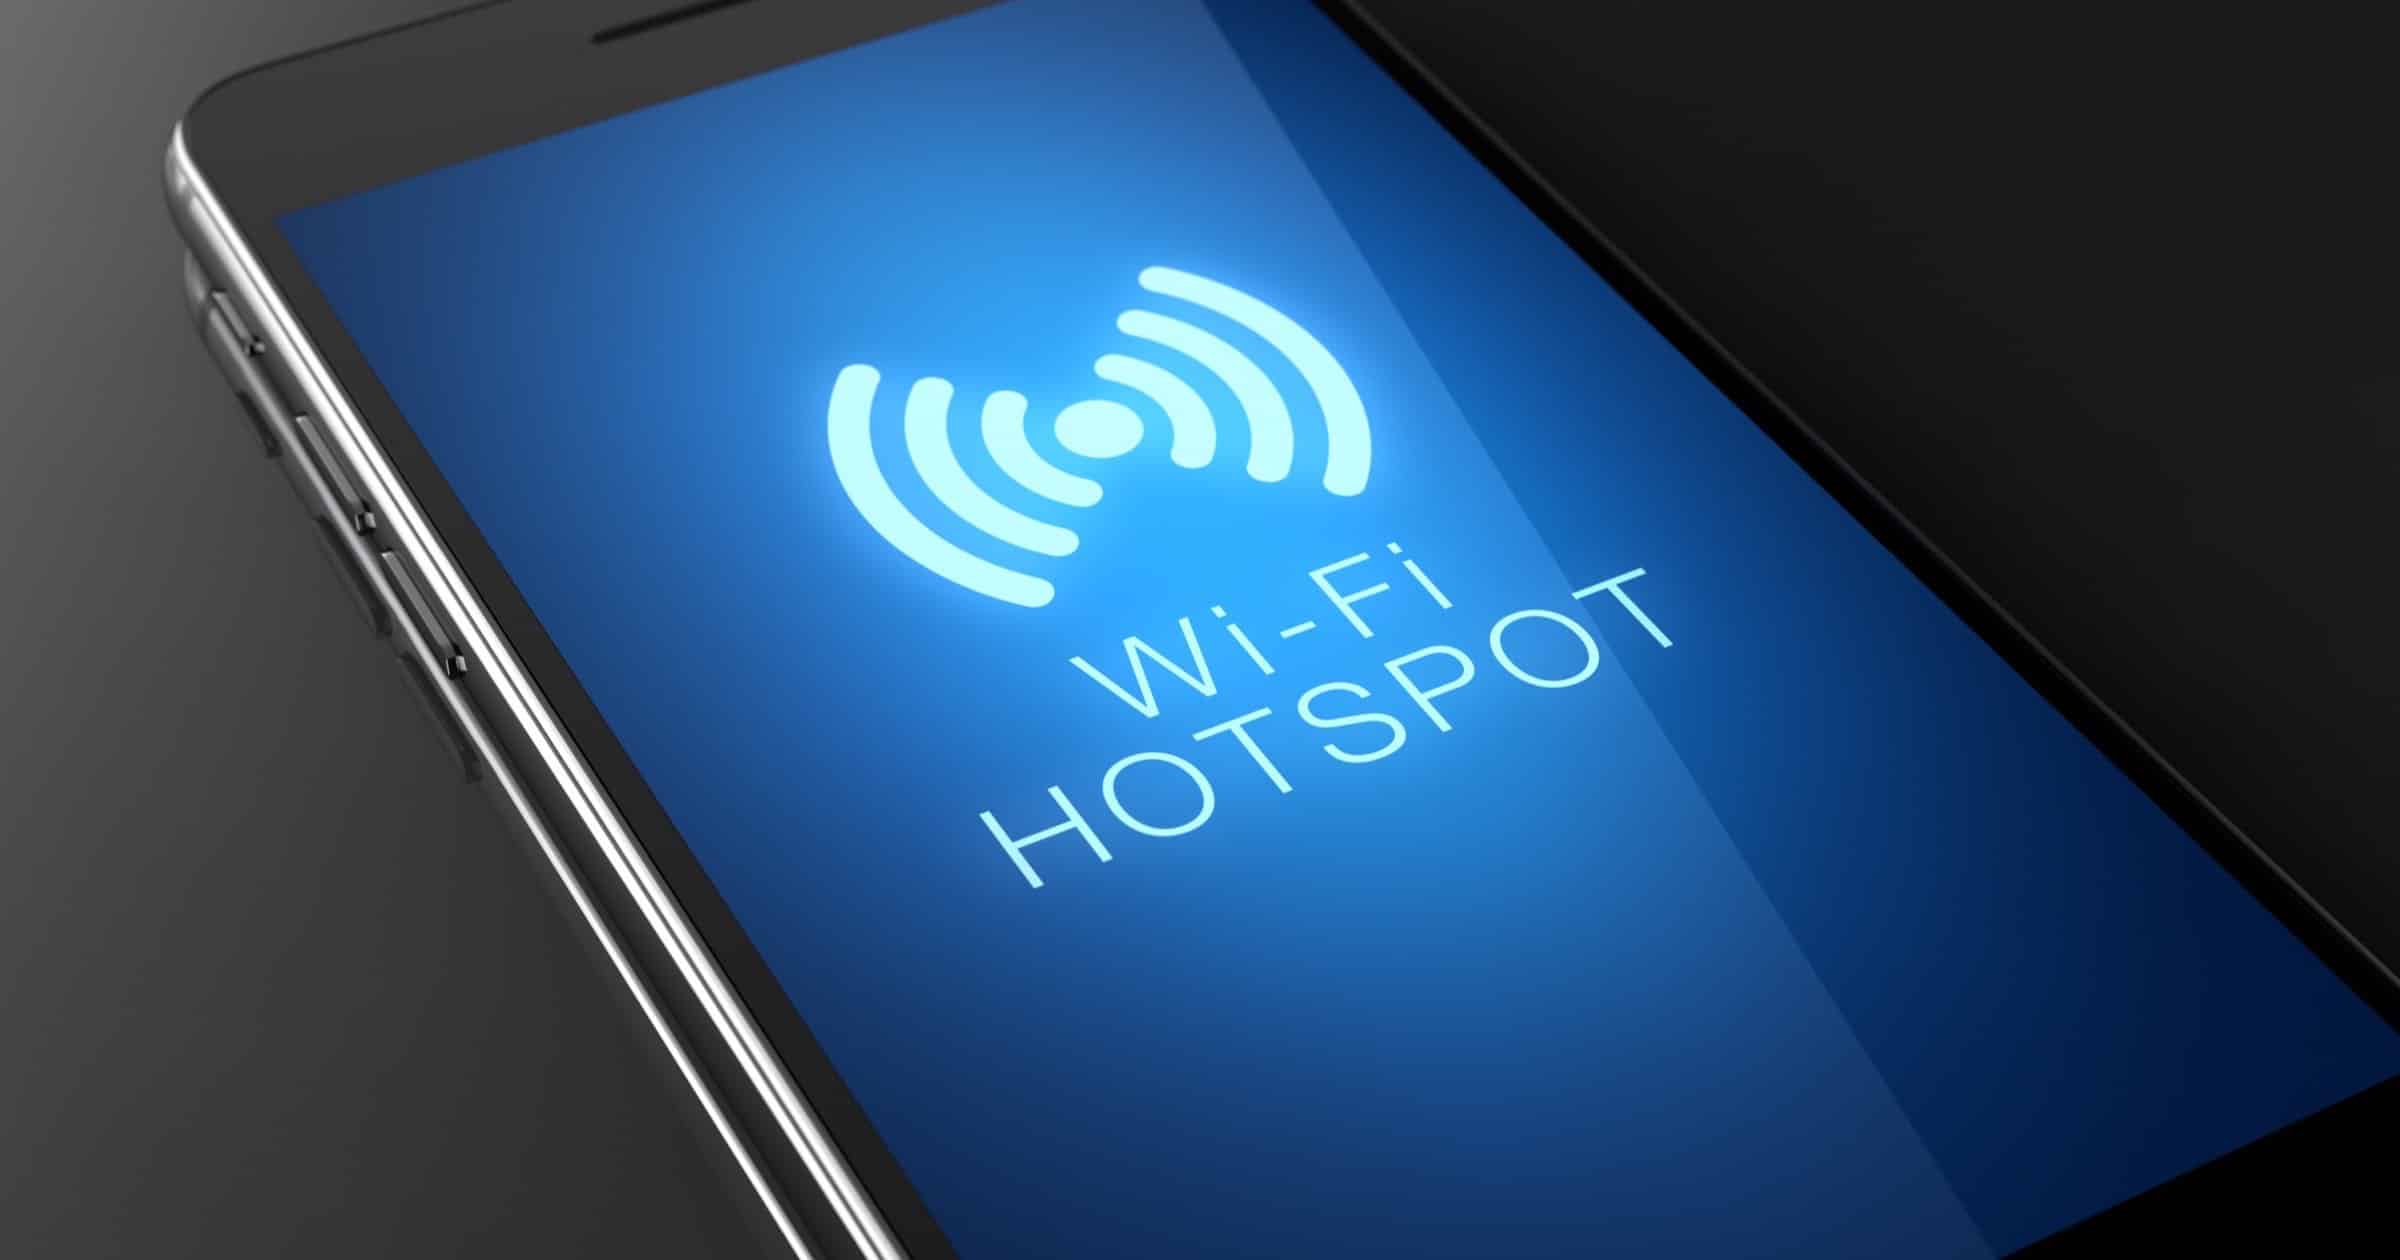 Verizon Adds Four New Mobile Hotspot Plans for Customers